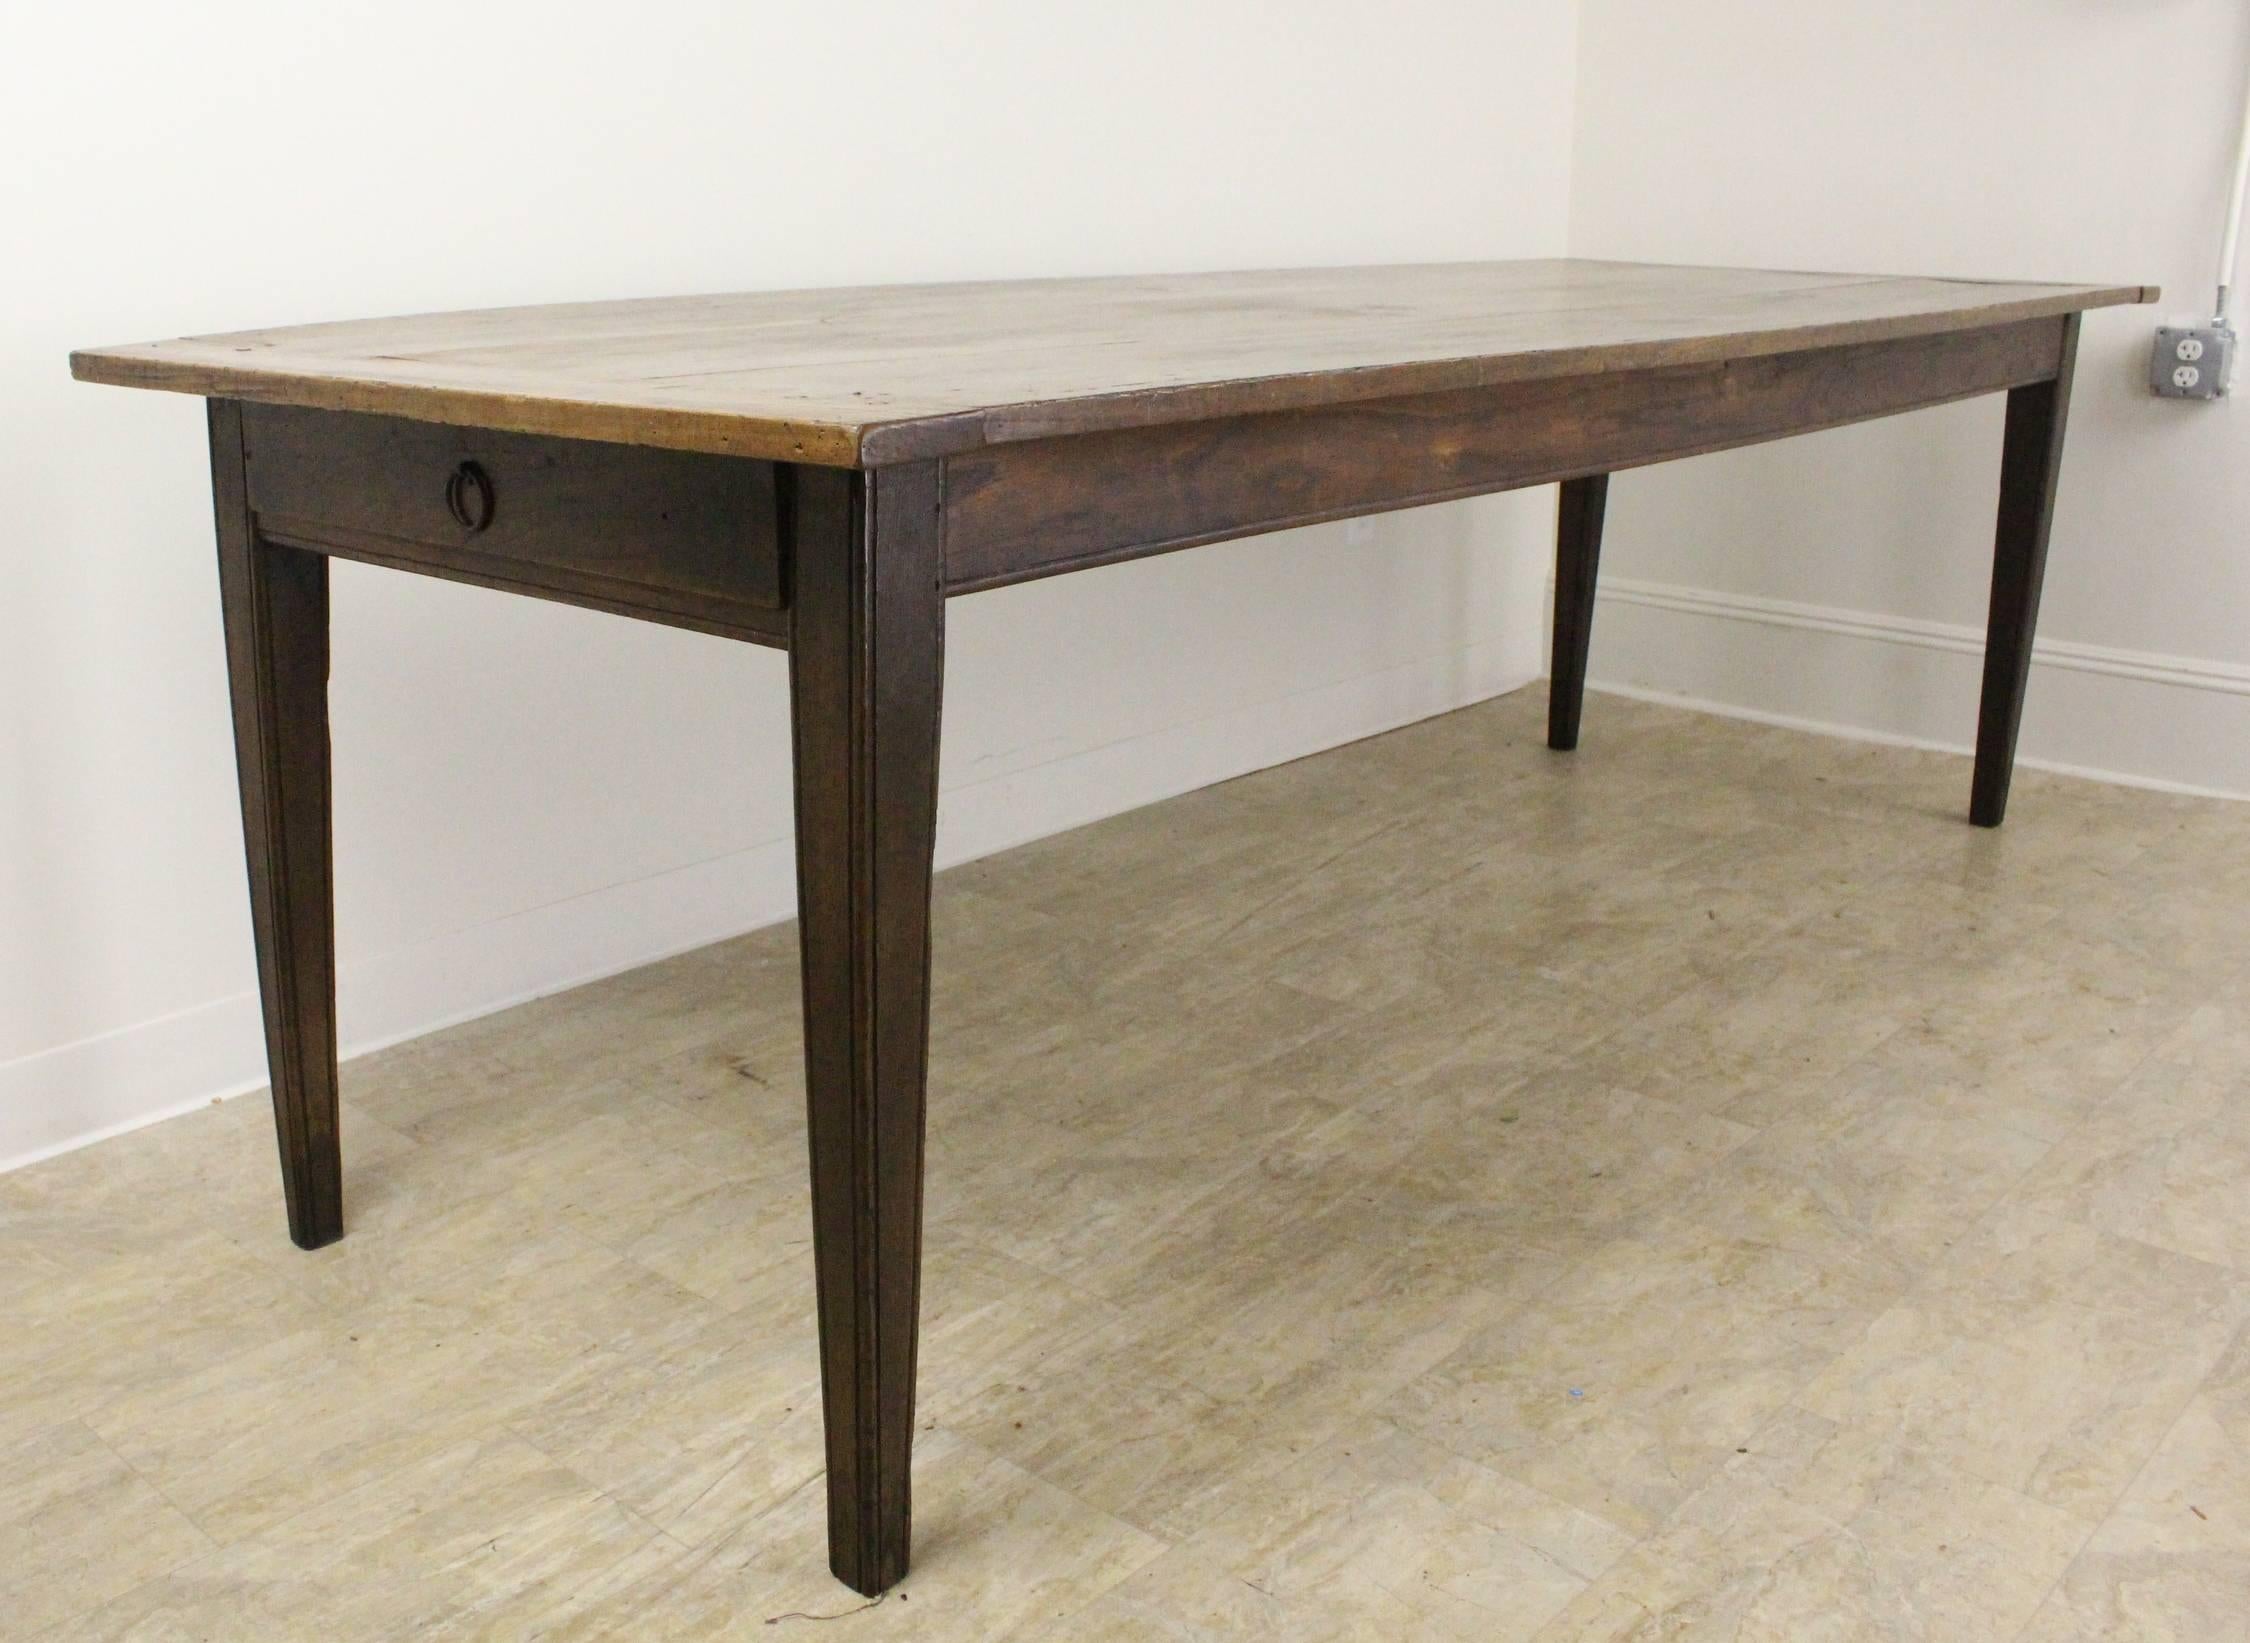 A large antique elm farm table with handsome proportions and lovely color, grain and patina. The elegant tapered legs and single drawer at the end add a nice design note. It should be mentioned that the apron is 25 inches high on the long sides and